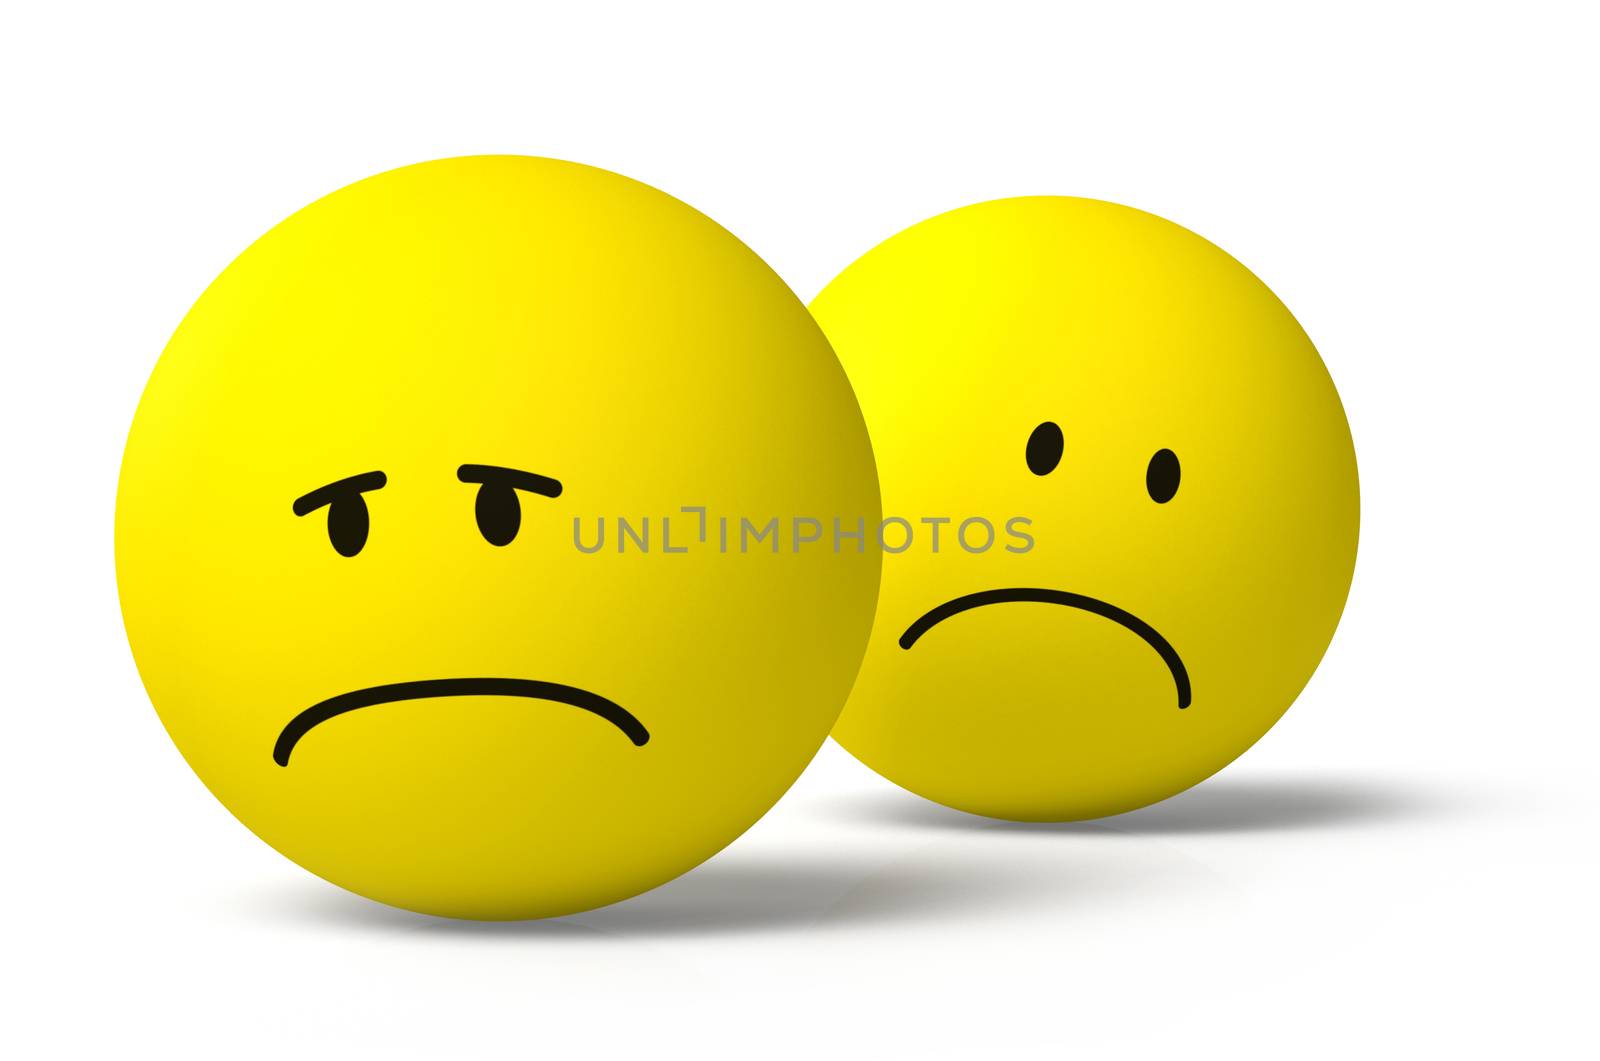 Two 3D emoji characters sad and unhappy by anterovium